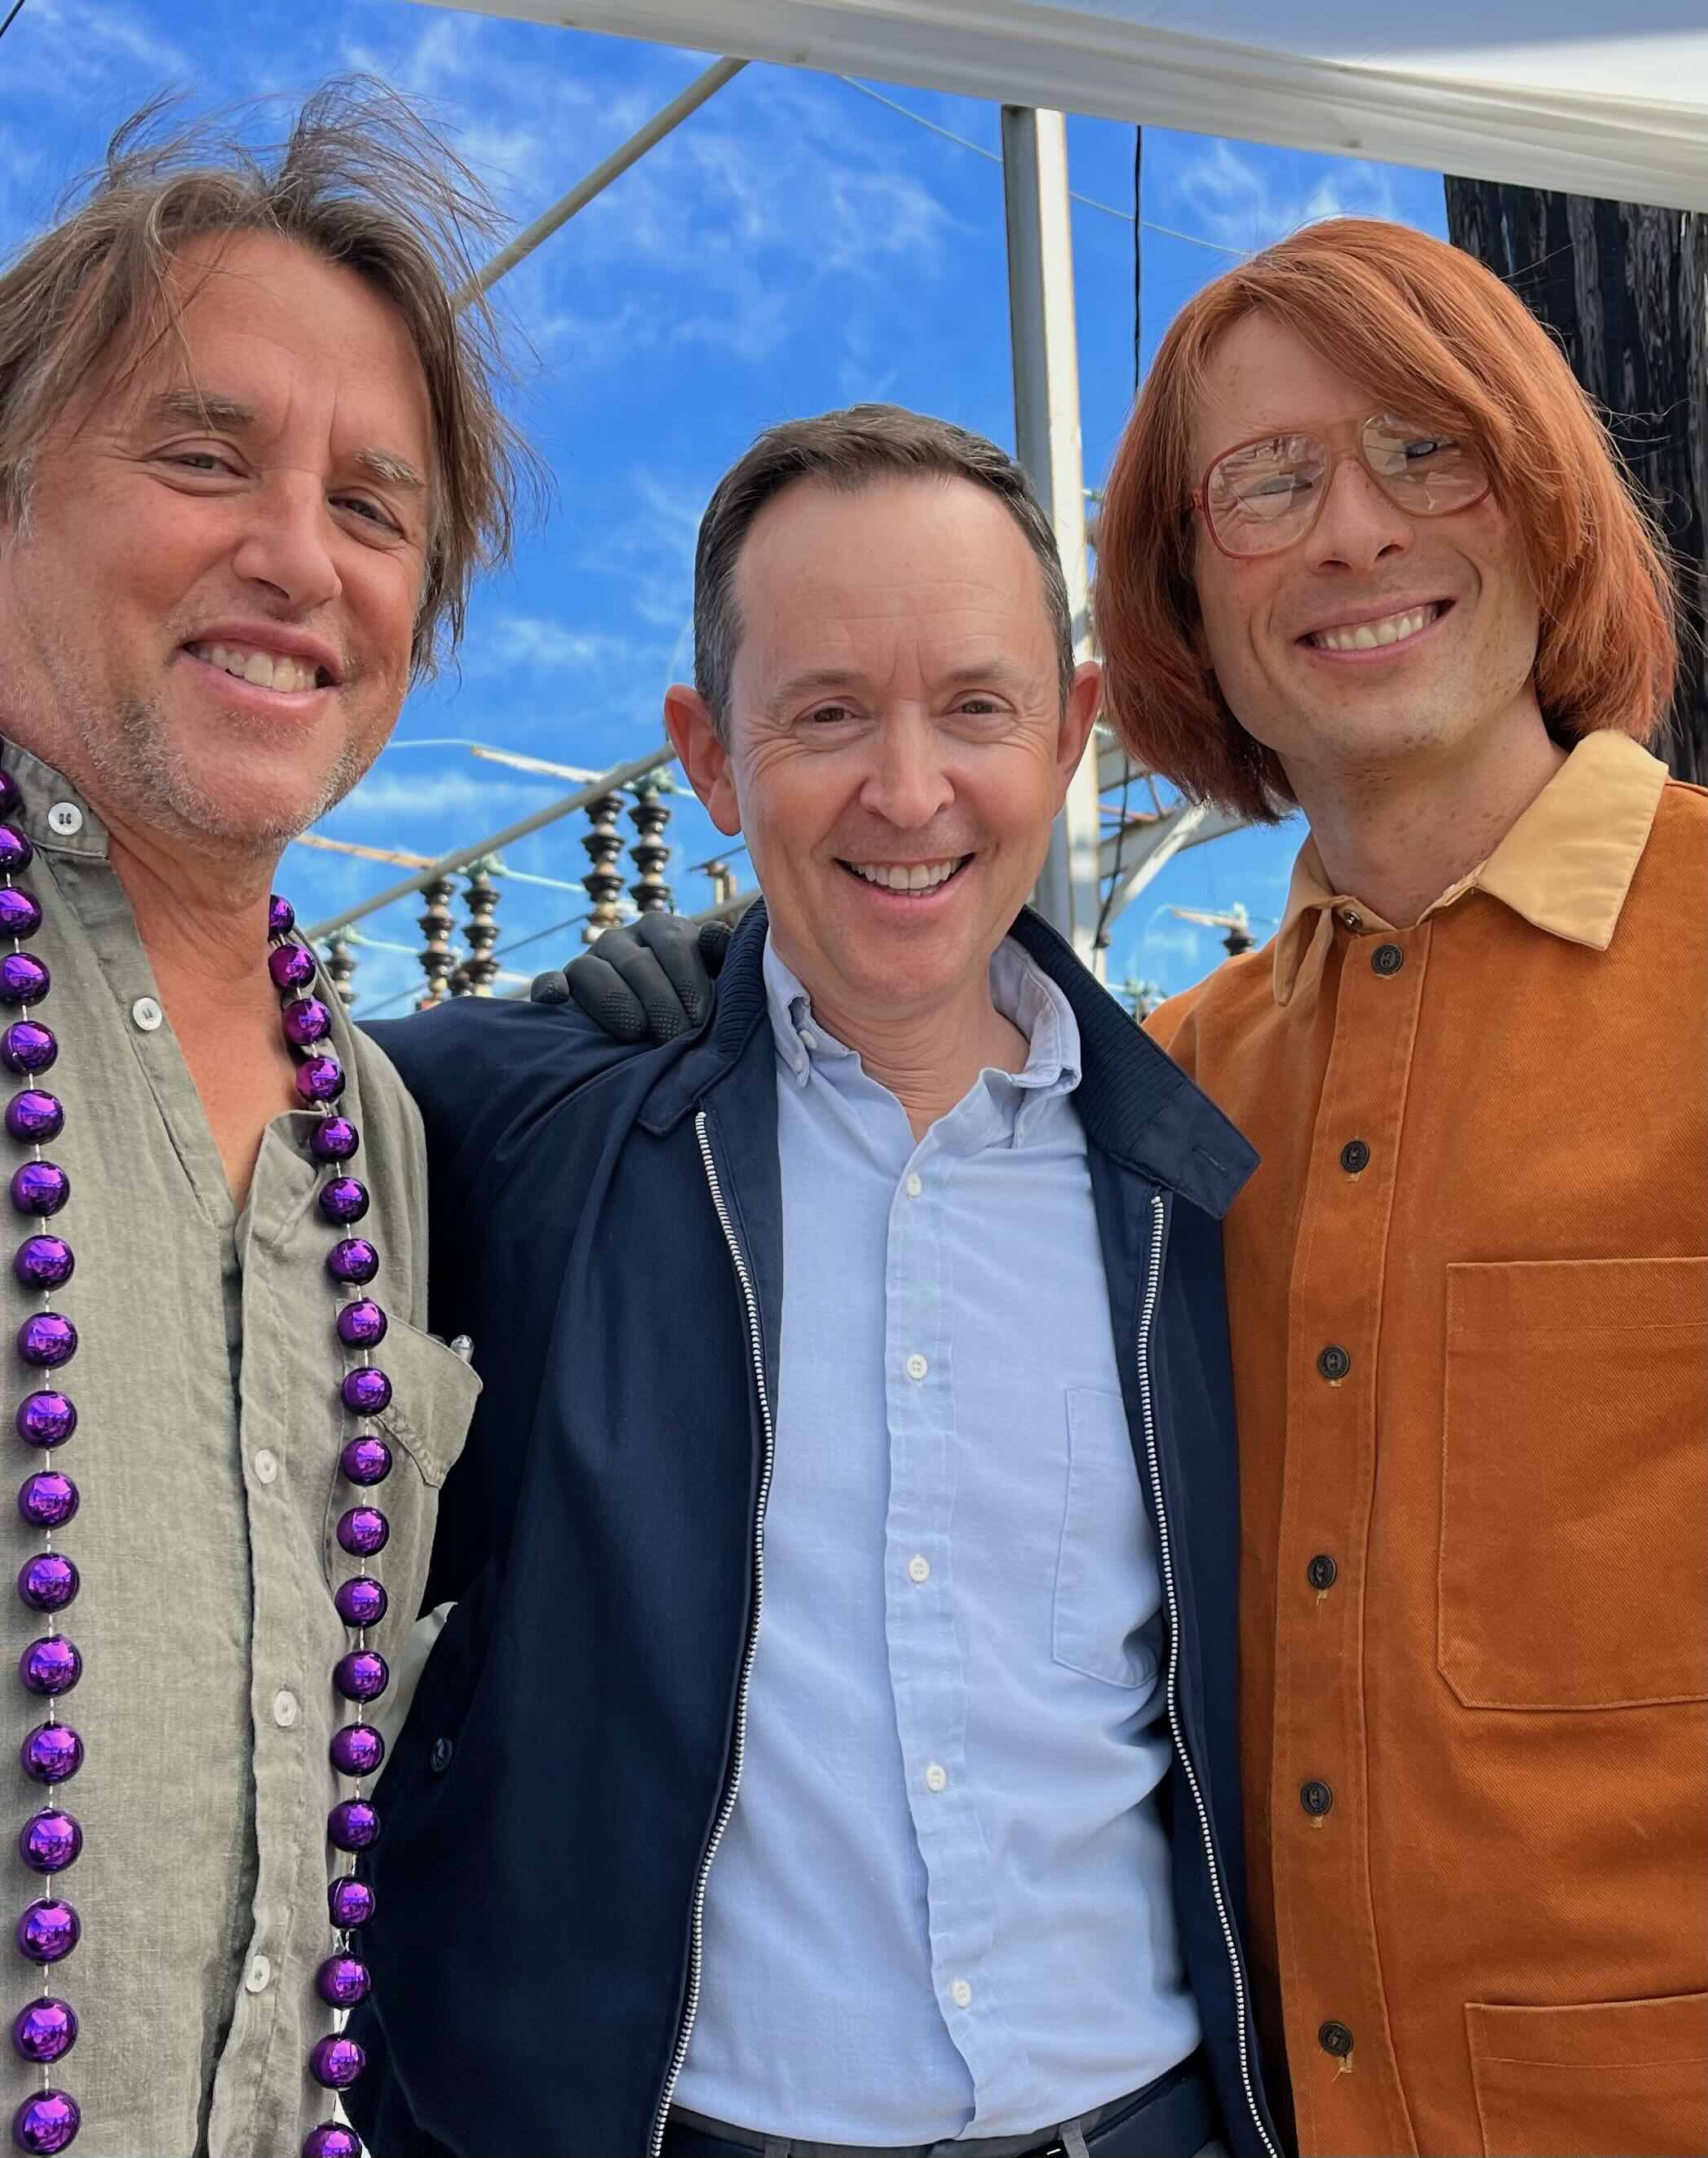 Richard Linklater (left), Robichaux, and Powell pose for a photo behind the scenes of the film 'Hit Man.'